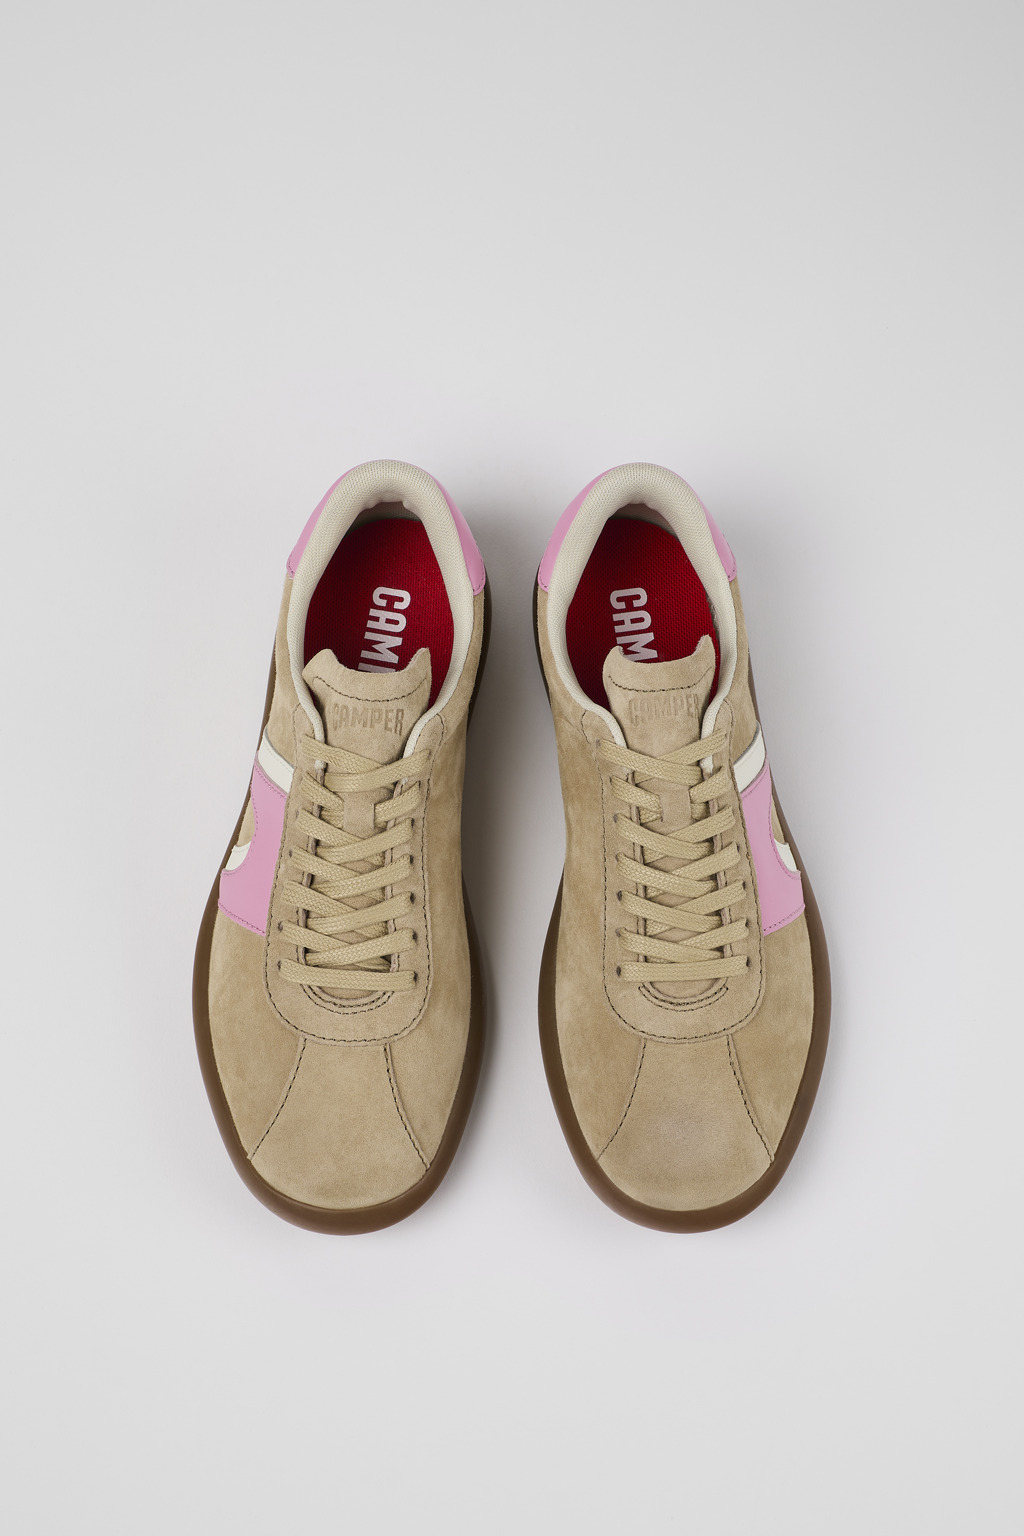 Pelotas Beige Sneakers for Women - Fall/Winter collection - Camper 